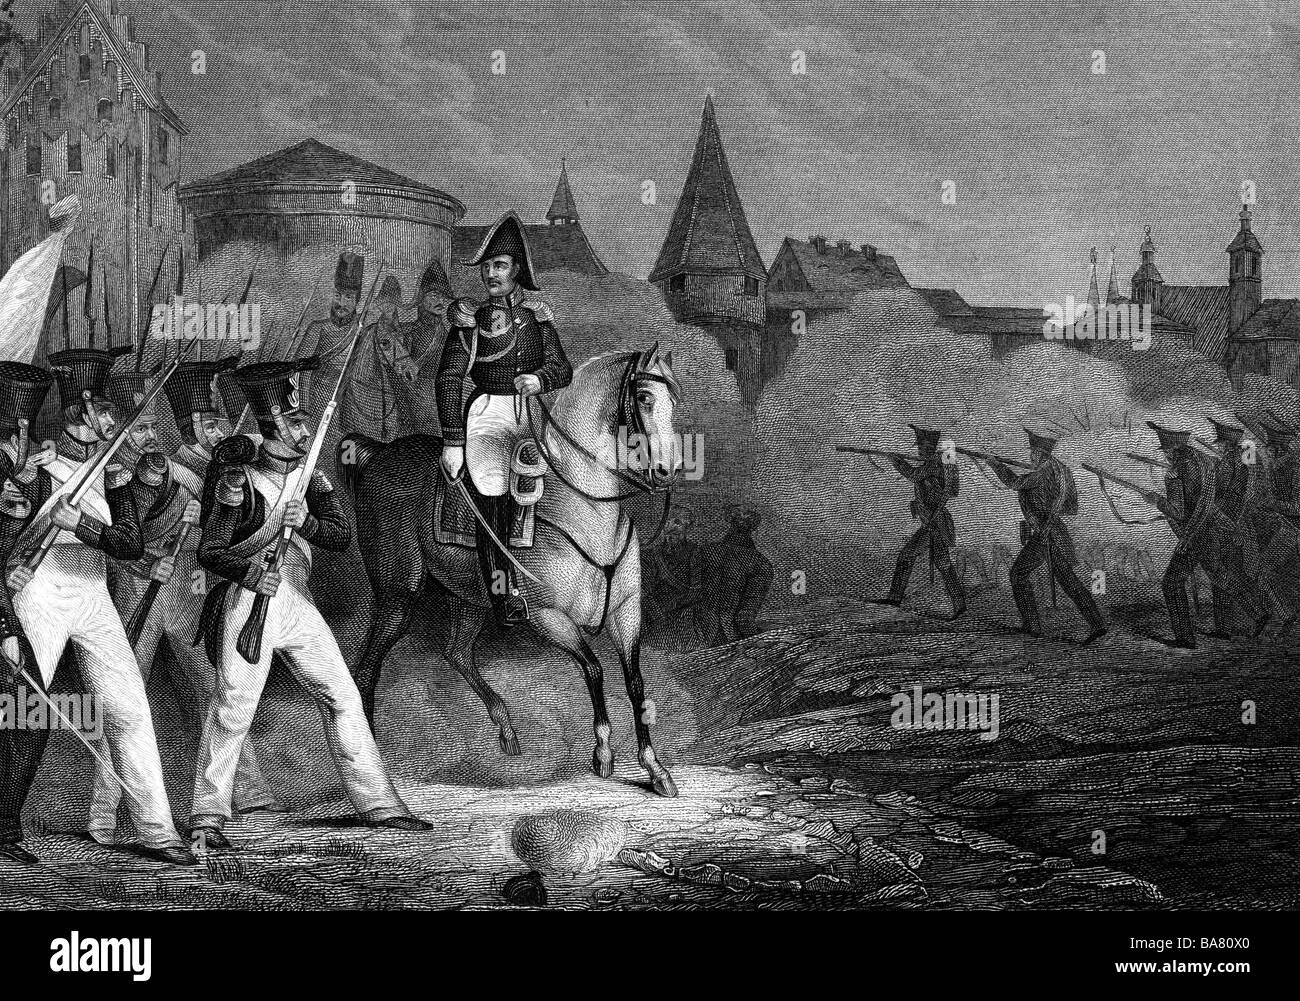 events, War of the Sixth Coalition 1812 - 1814, Battle of Luneburg, 2.4.1813, attack of the French commanded by general Joseph Morand, steel engraving, 19th century, Napoleonic Wars, Germany, combat, skirmish, historic, historical, people, Stock Photo